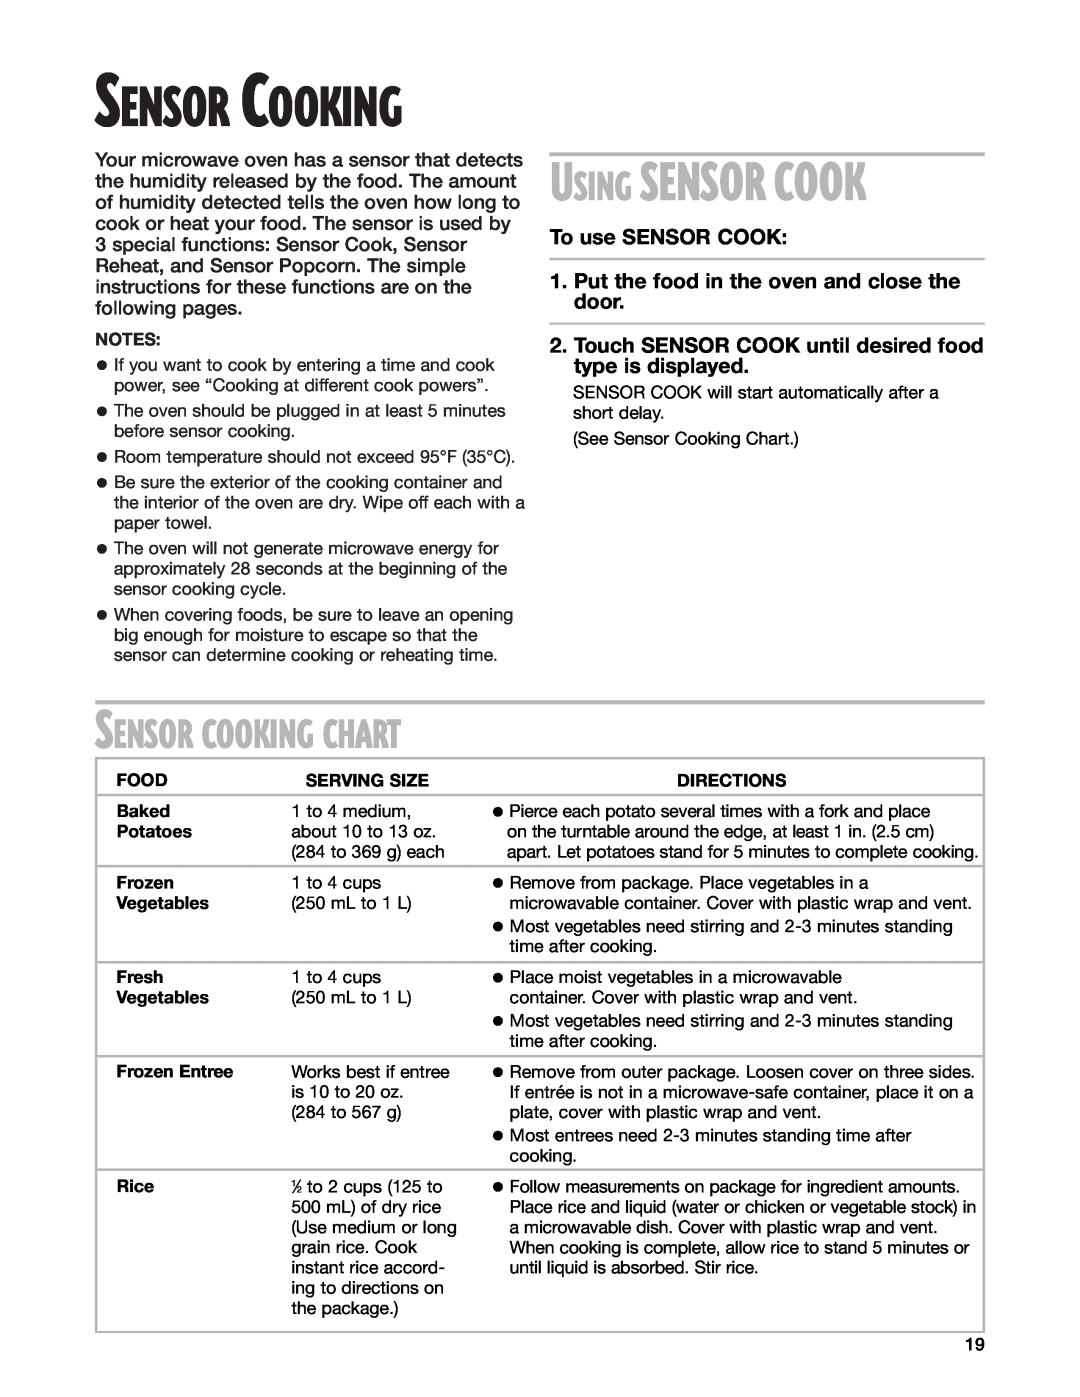 Whirlpool GM8155XJ Sensor Cooking Chart, To use SENSOR COOK 1. Put the food in the oven and close the door 